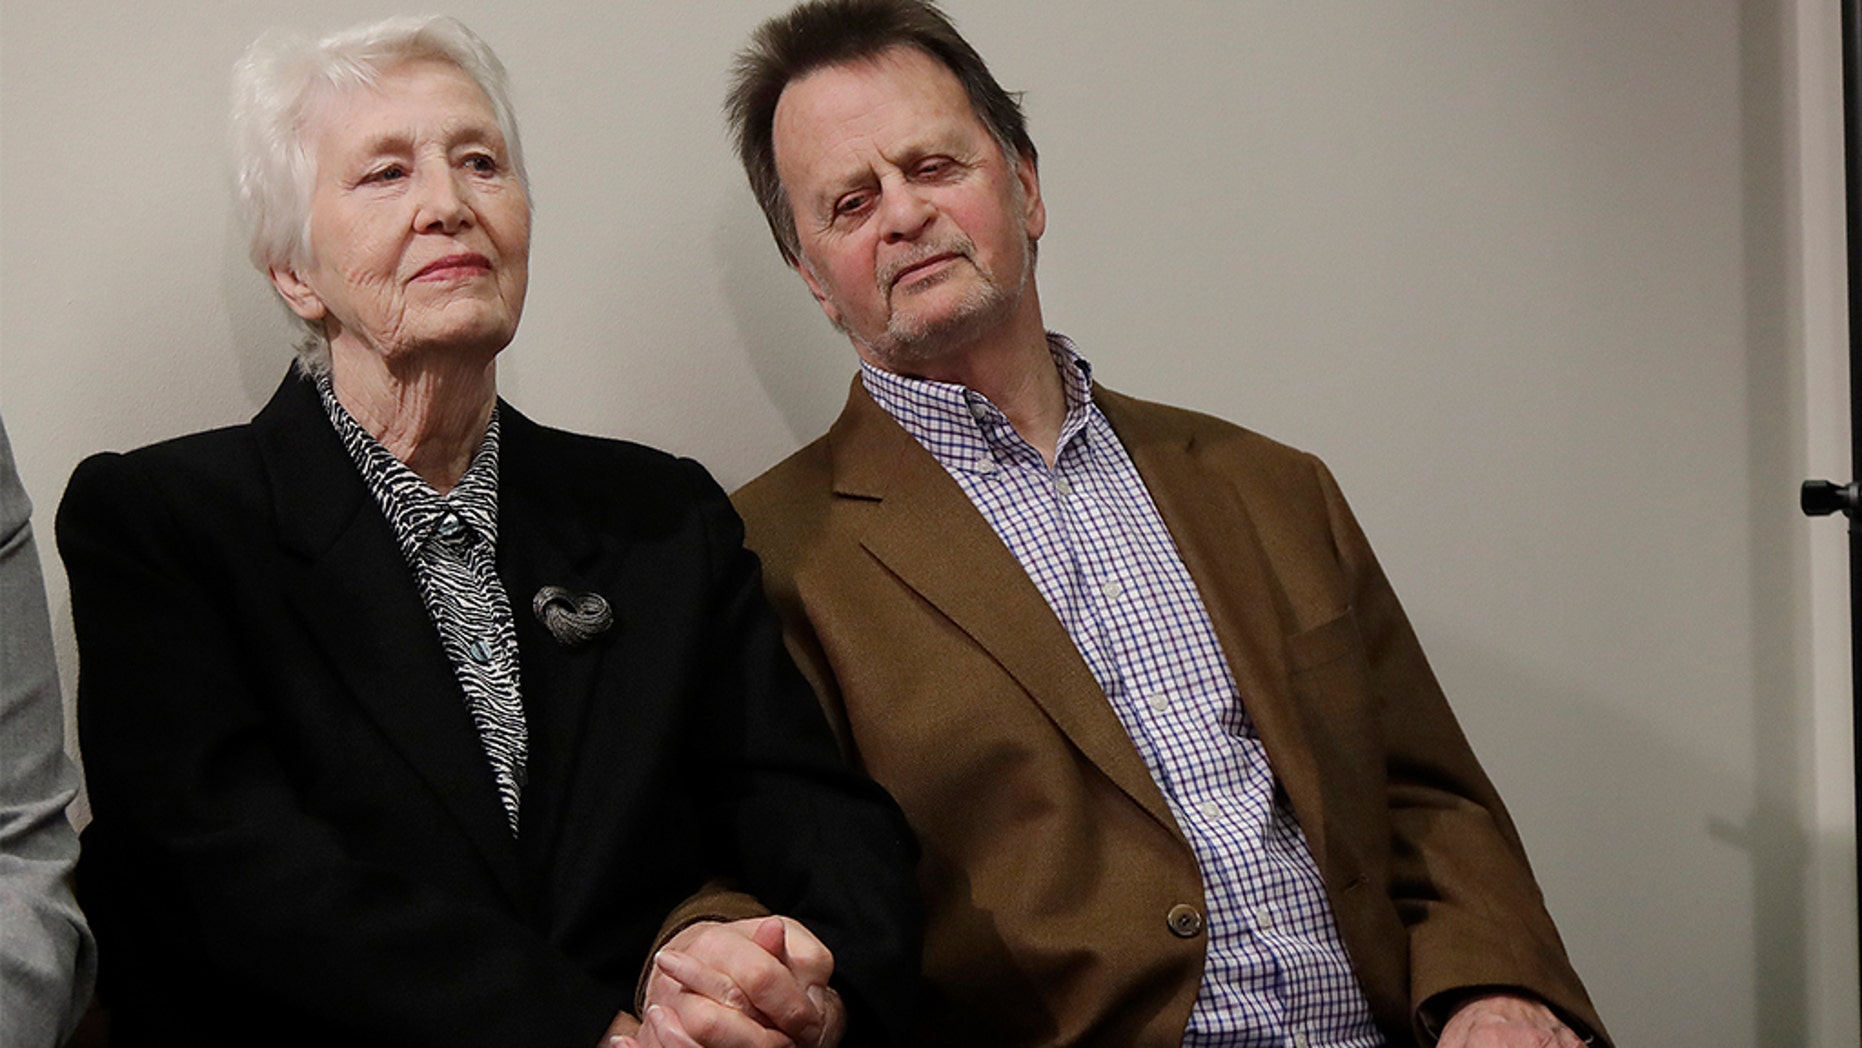 Edwin Hardeman, right, sits with his wife, Mary, at a press conference in San Francisco on Wednesday. (AP Photo / Jeff Chiu)